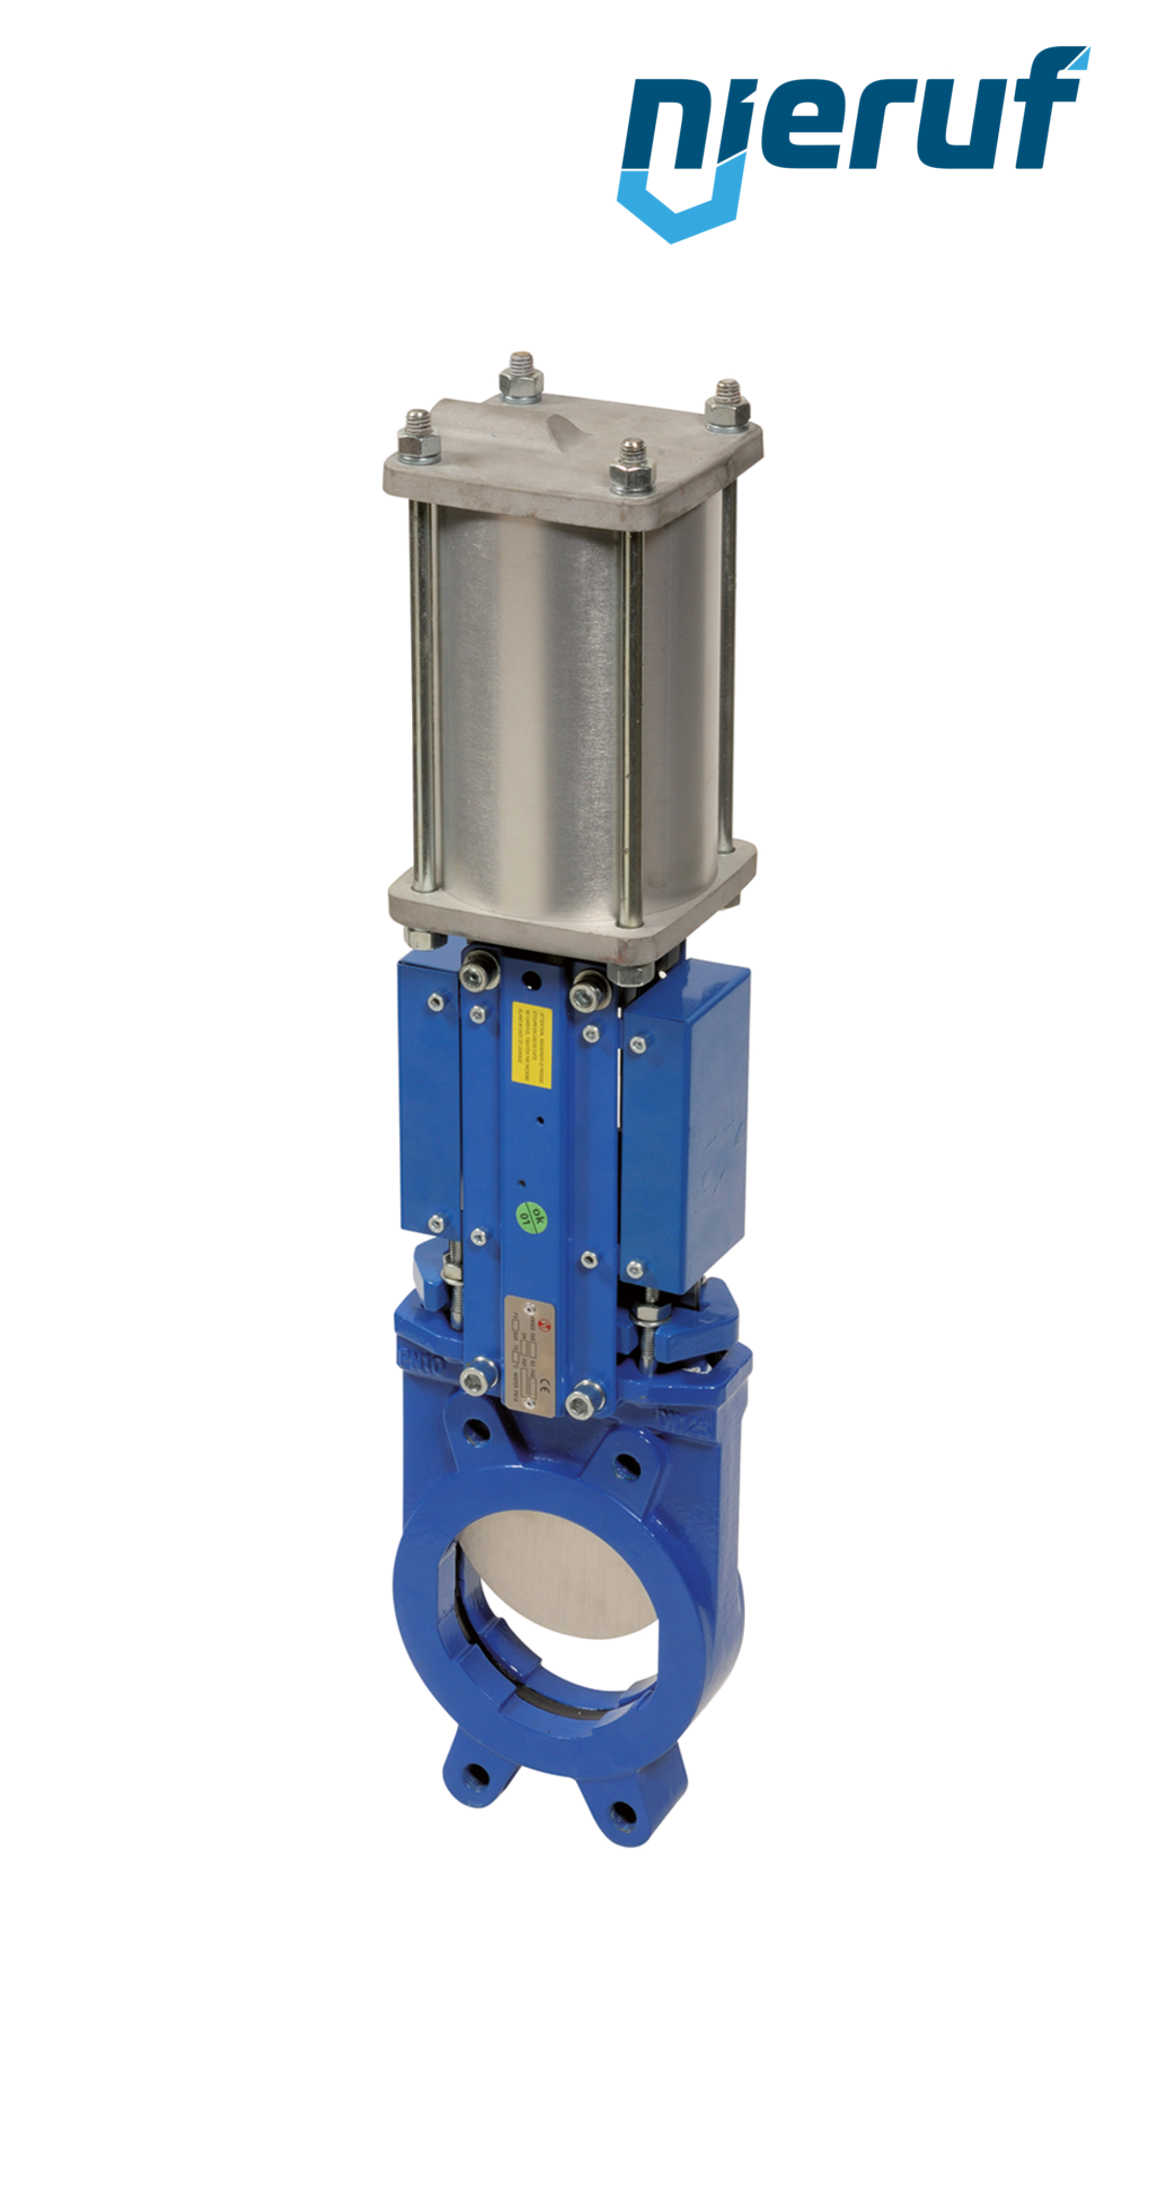 Knife gate valve DN 80 SR01 EPDM pneumatic actuation double acting